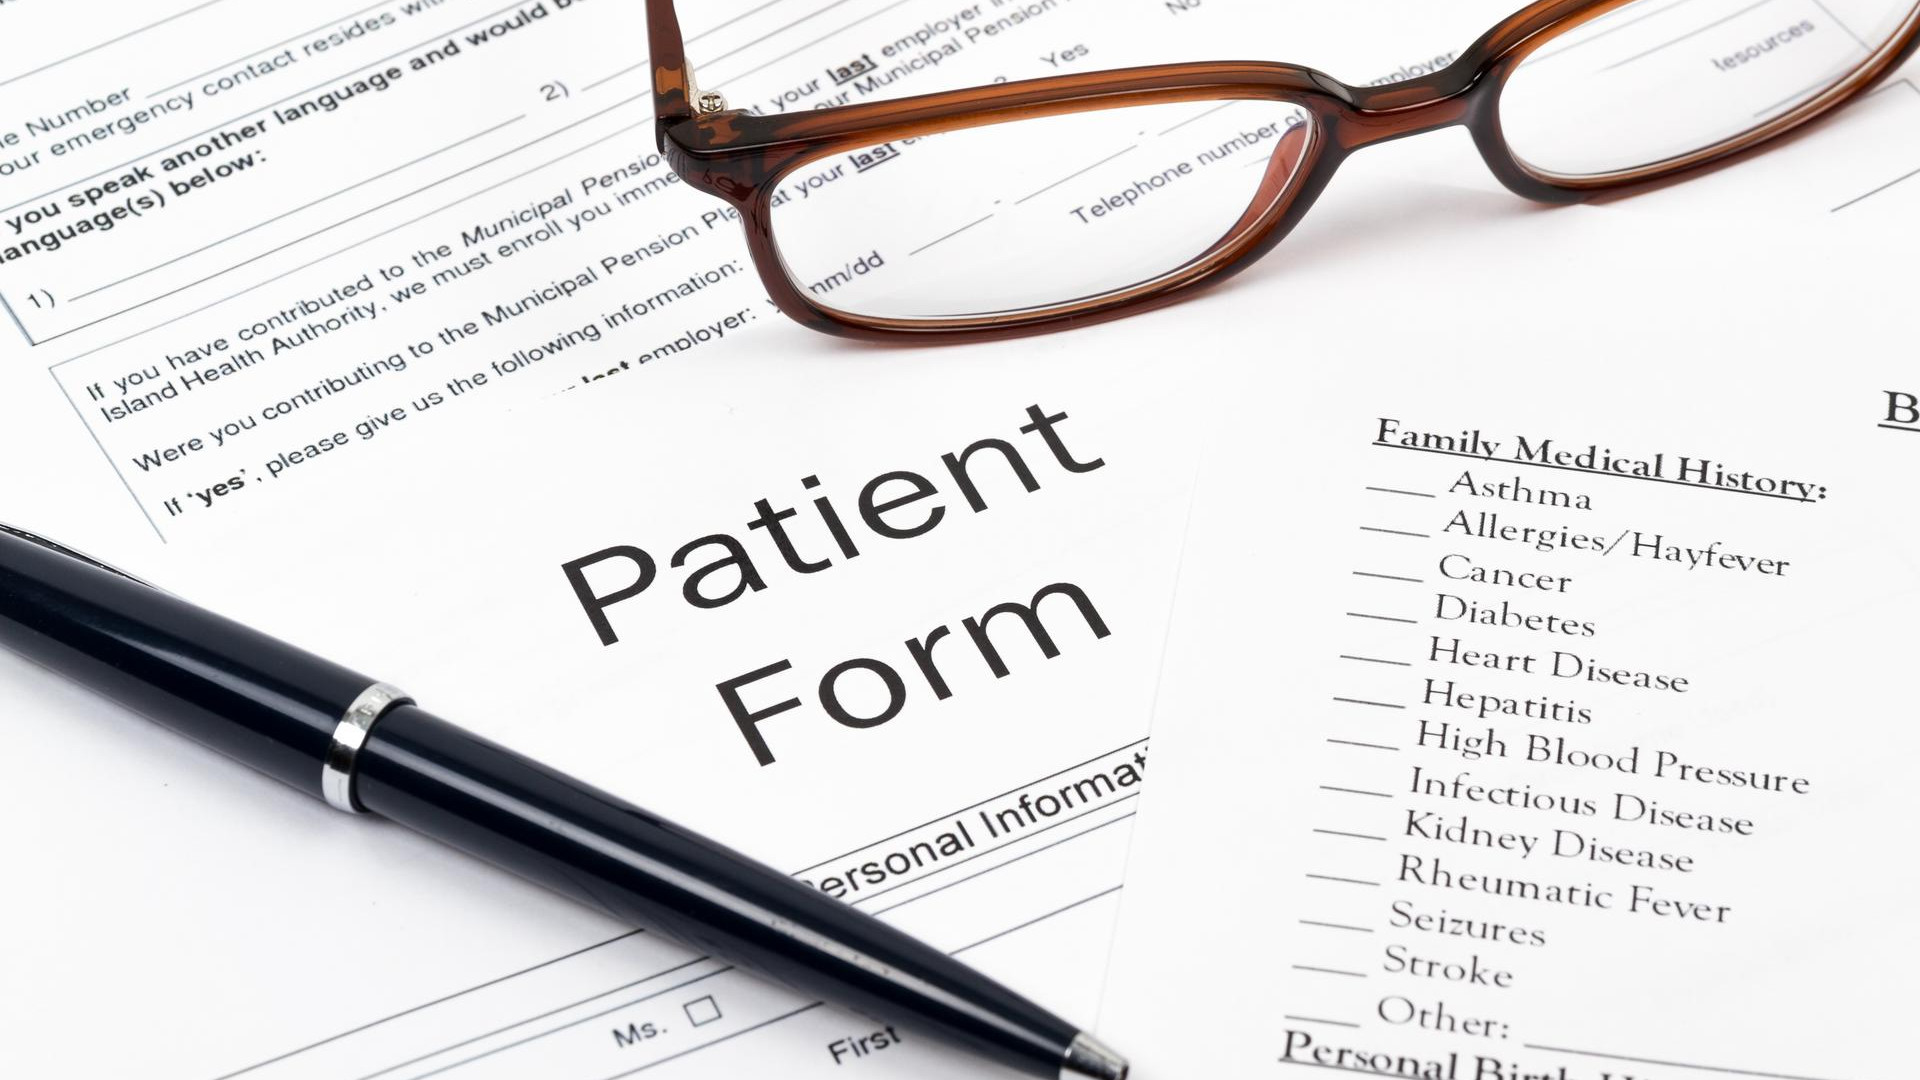 Why must new-patient forms be filled in?